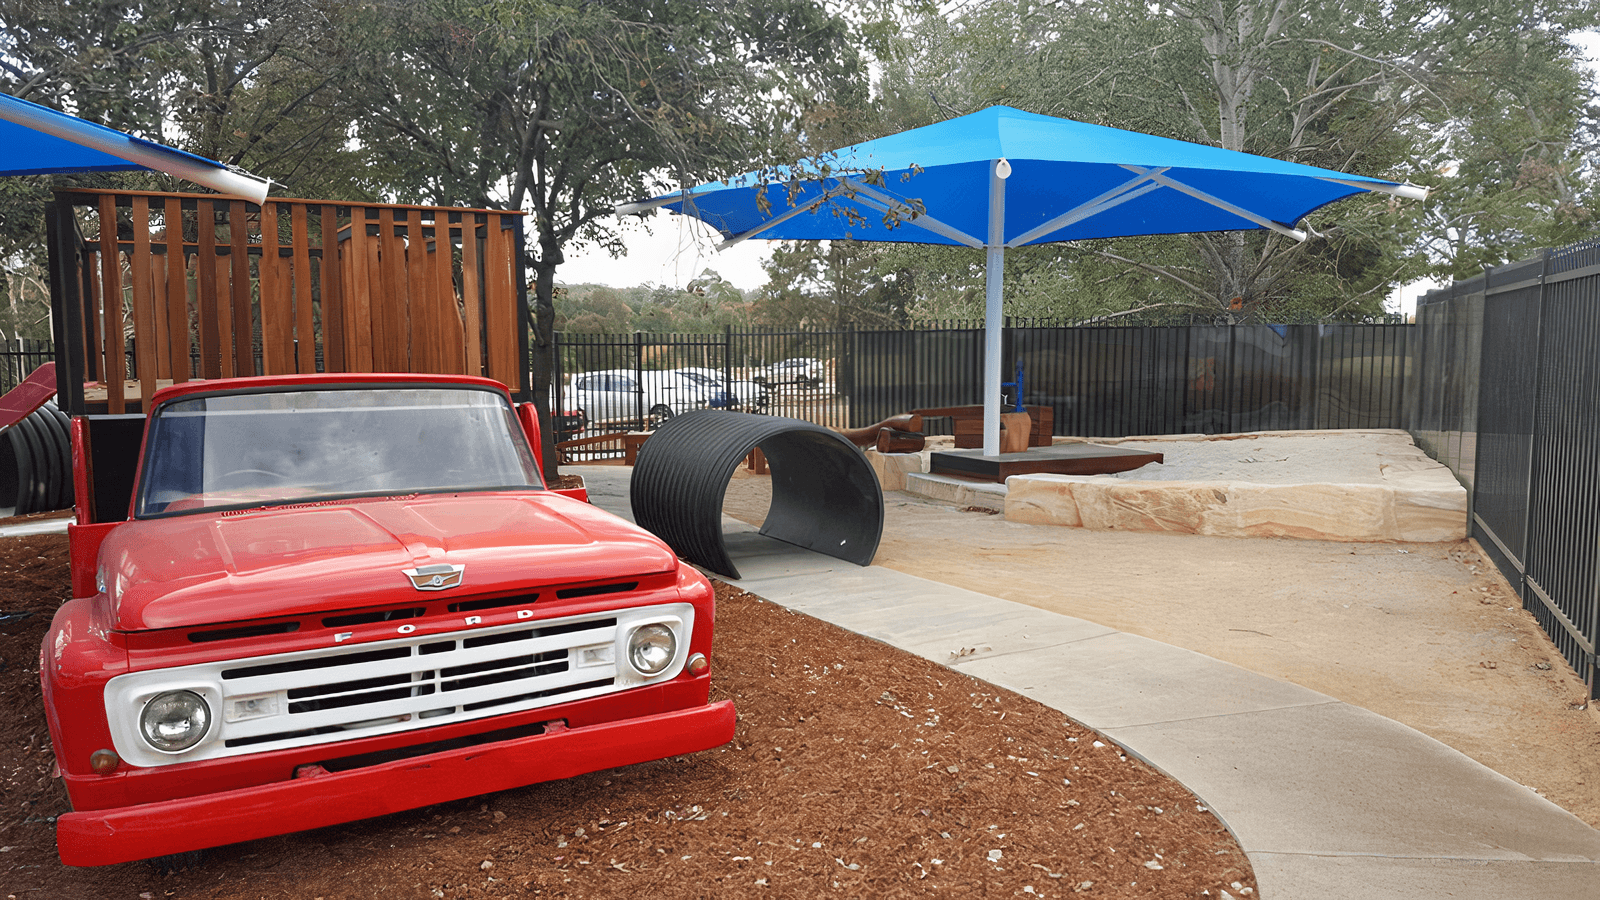 Themed playgrounds with a vintage Ford car and tunnel